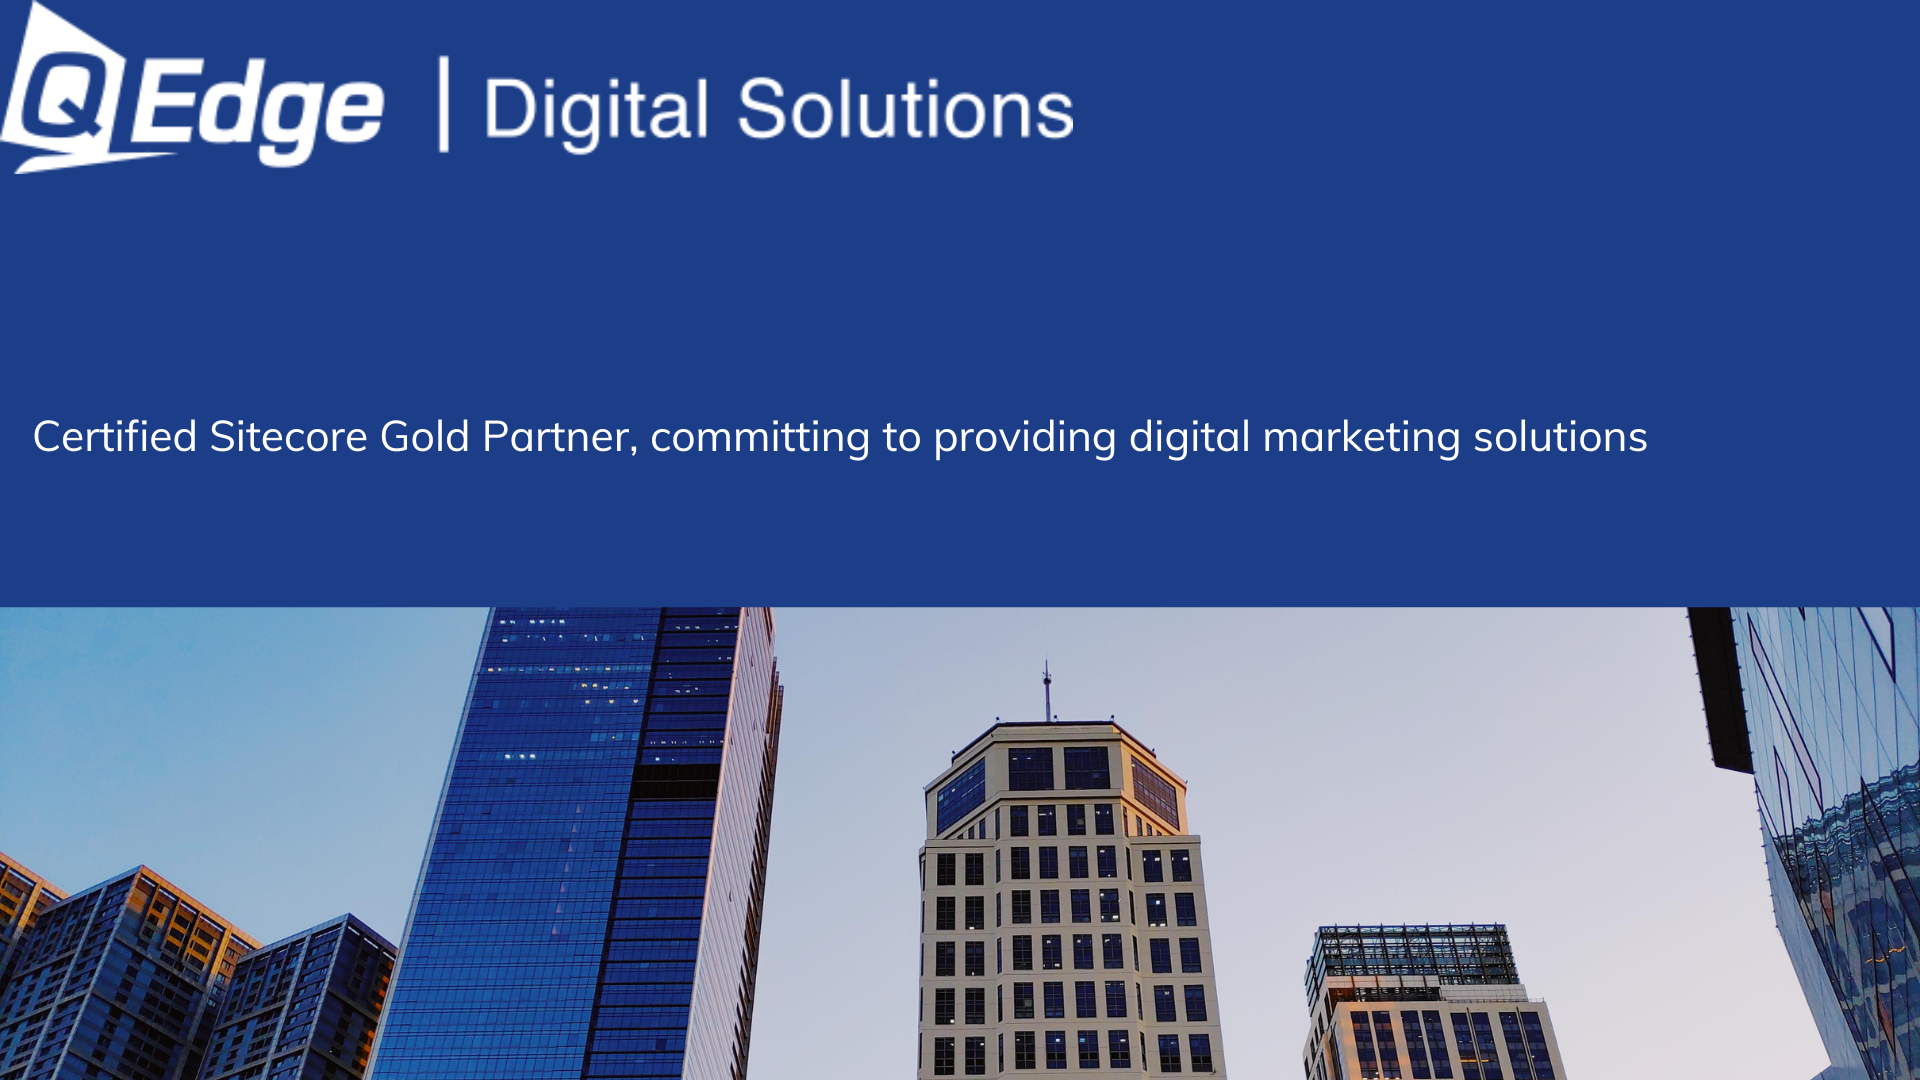 QEdge, as certified Sitecore Gold Partner, is committing to provide digital marketing solutions.